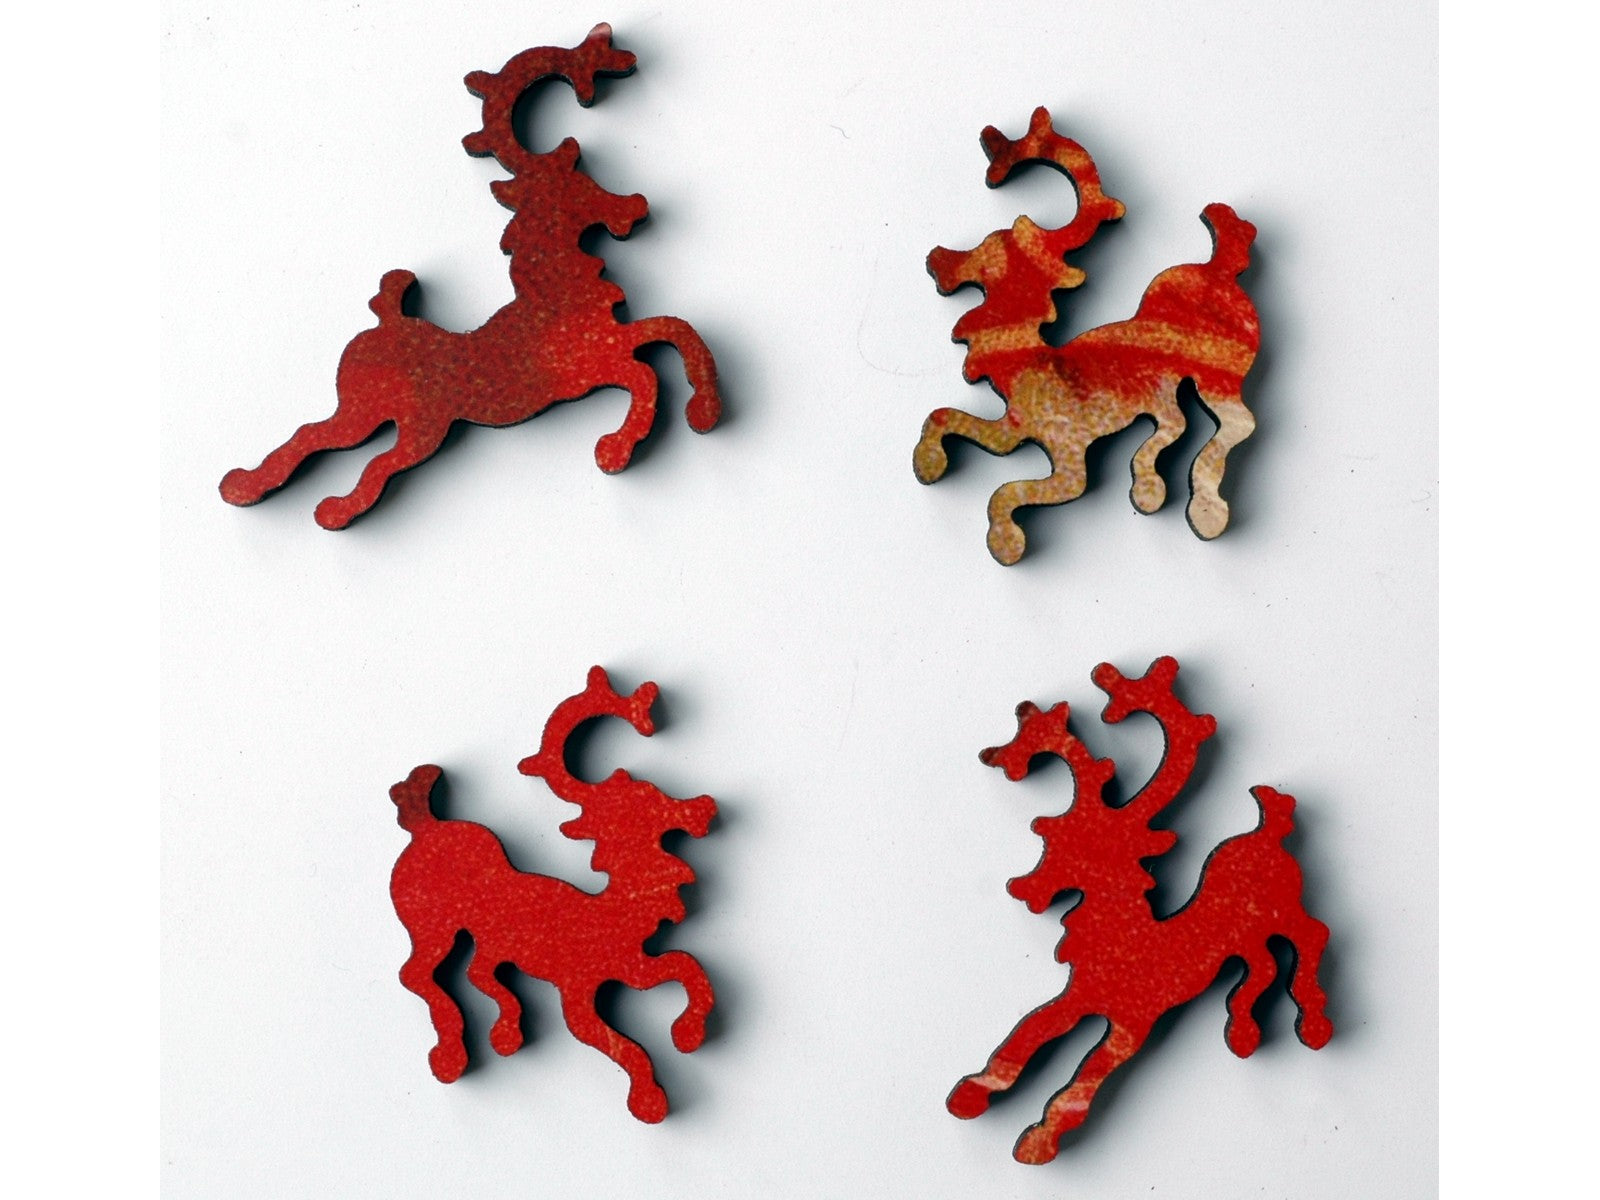 A closeup of pieces in the shape of reindeer.